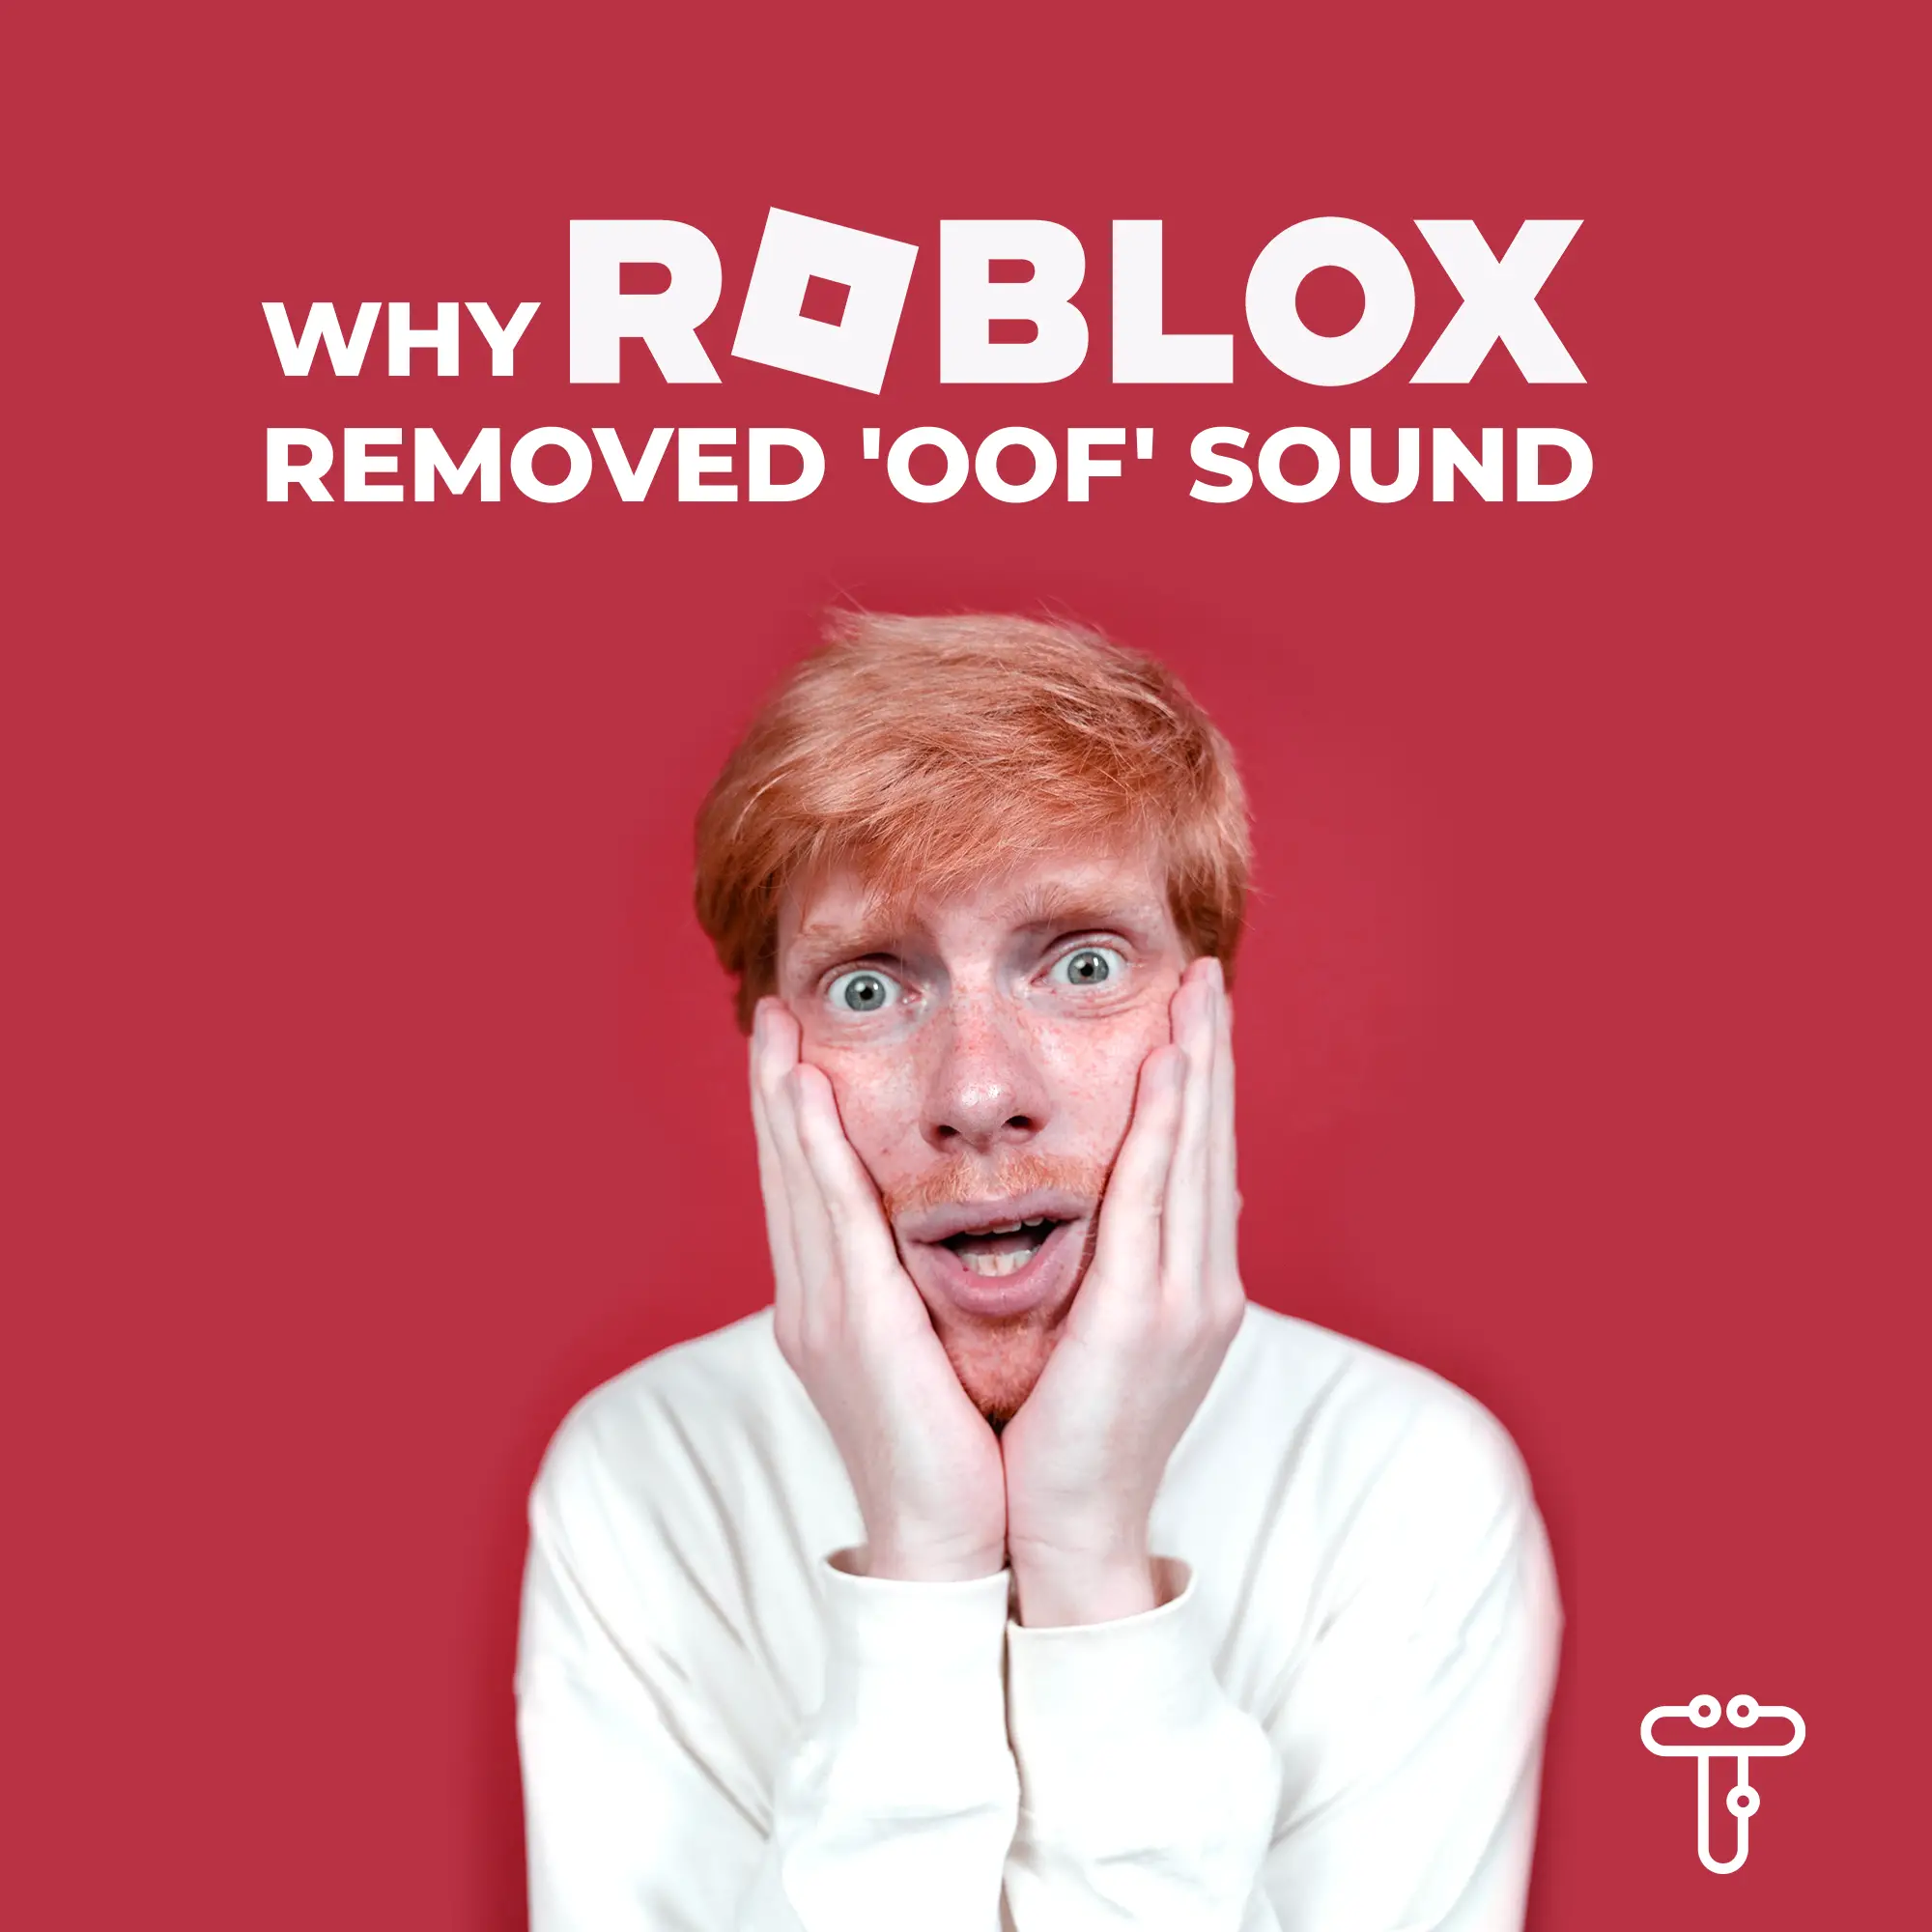 Why Roblox Removed 'Oof' Sound image